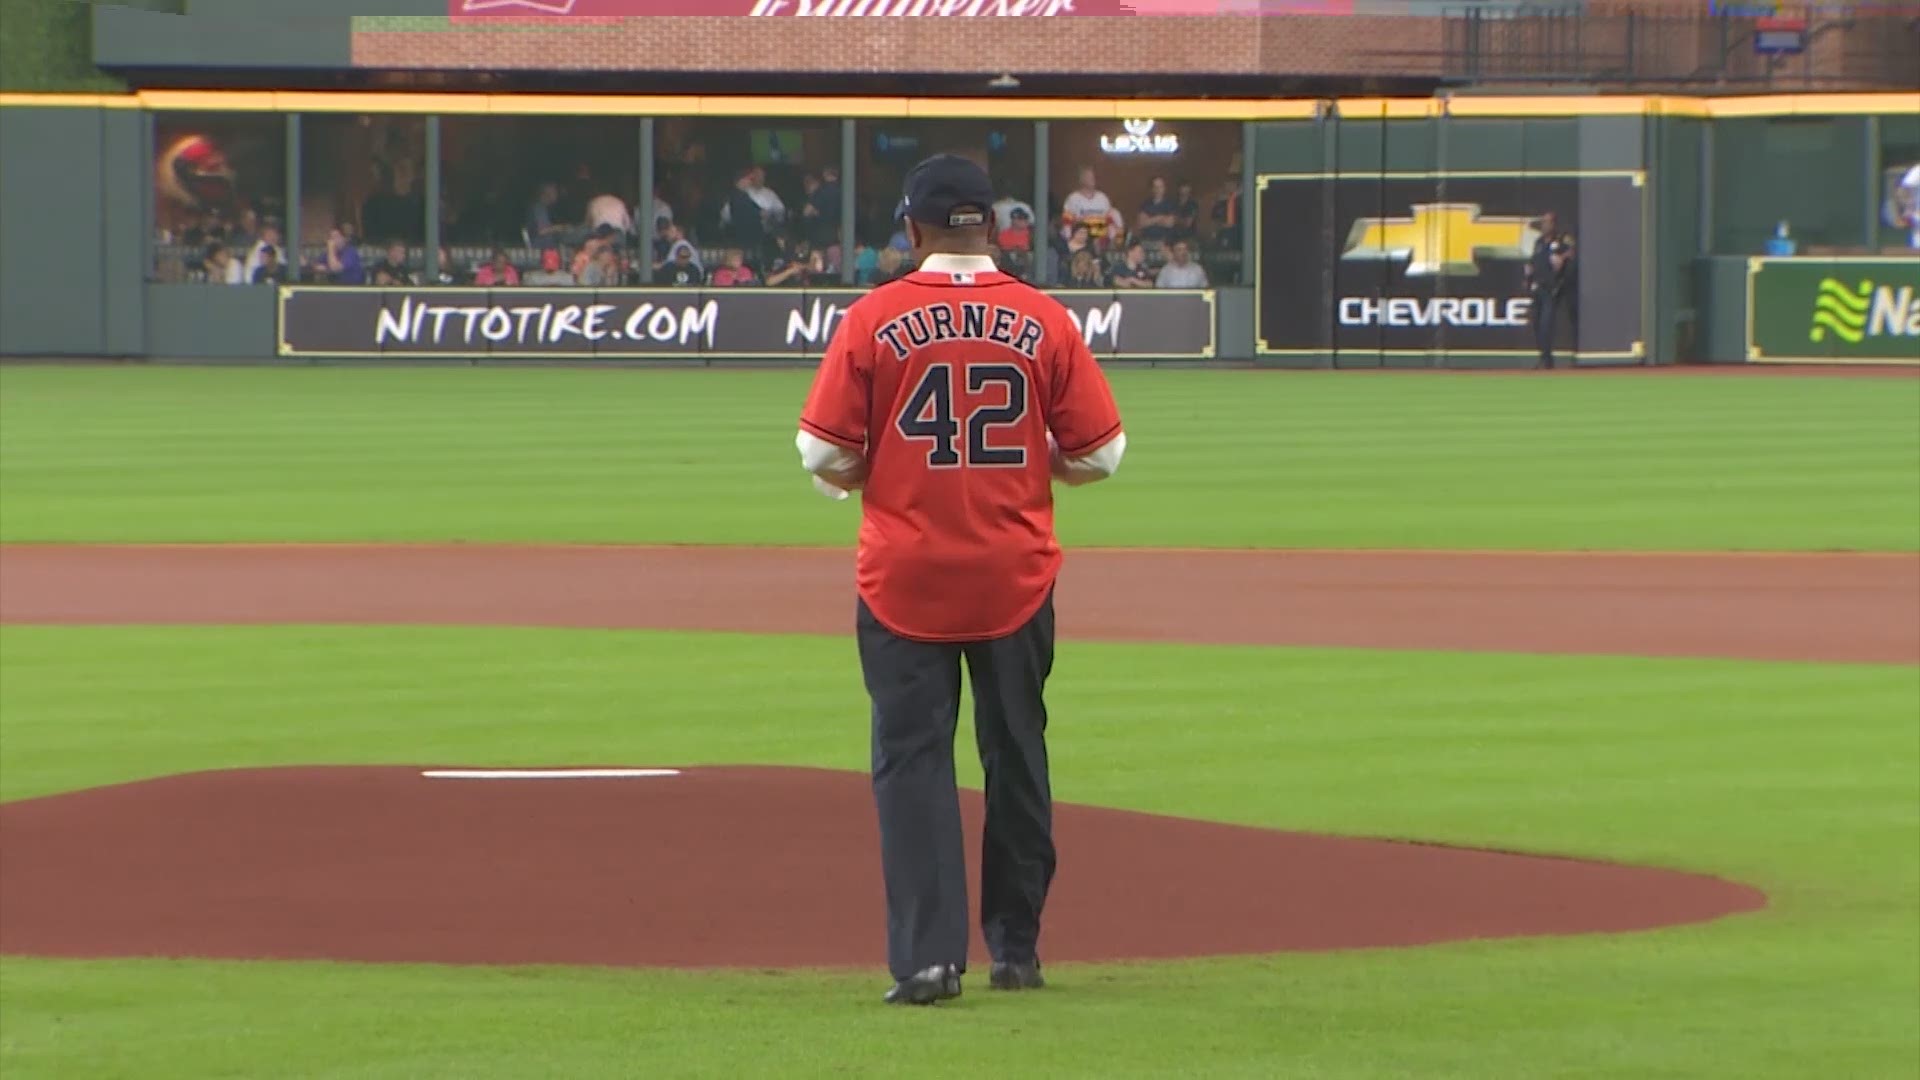 Houston mayor Sylvester Turner received a World Series ring from the Houston Astros and threw out the first pitch before the team's game against the Toronto Blue Jays on June 27, 2018.